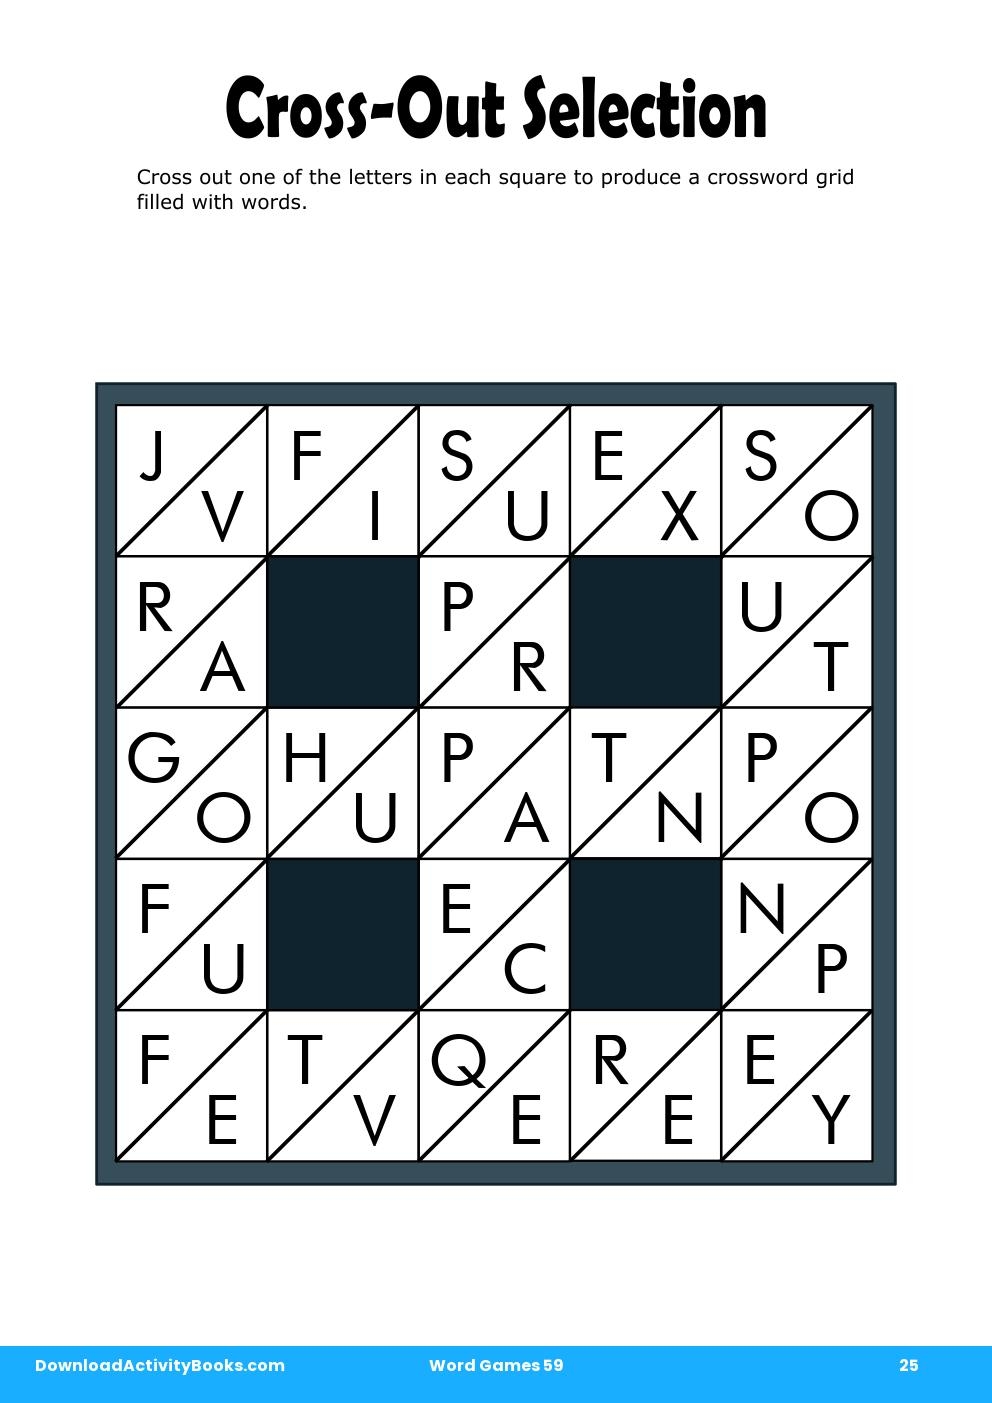 Cross-Out Selection in Word Games 59